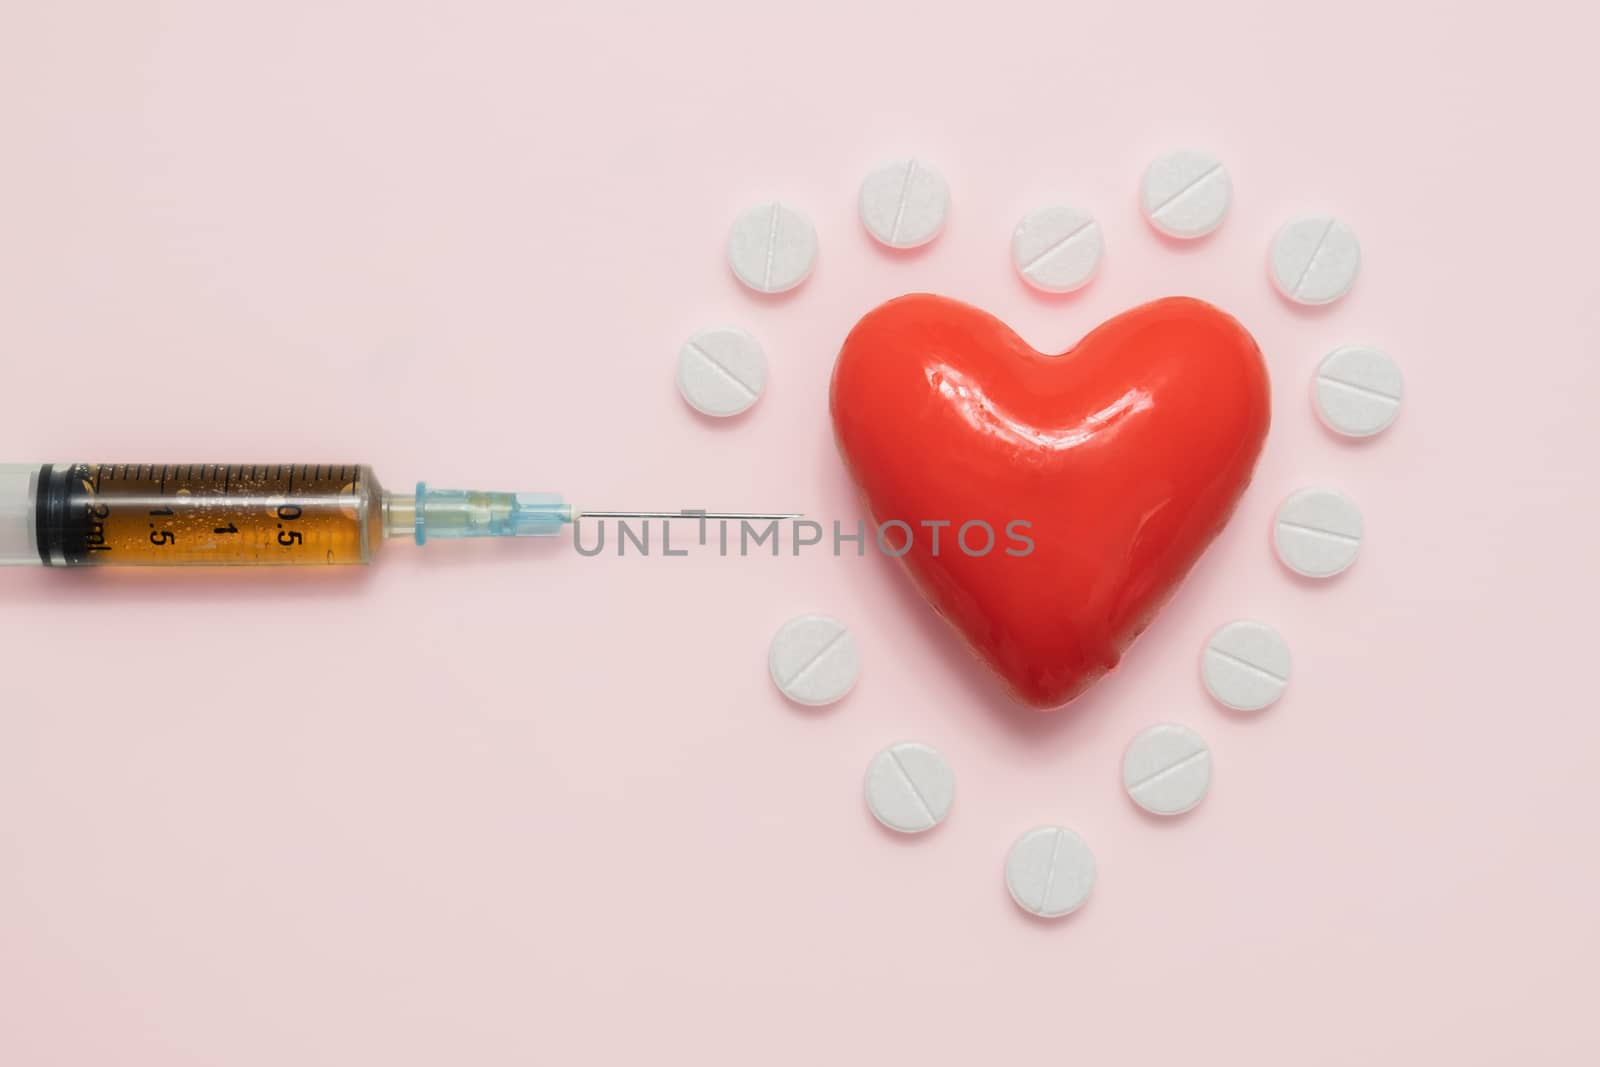 Heart, pills and syringe on pink backround, top view. Cardiology, heart disease concept.